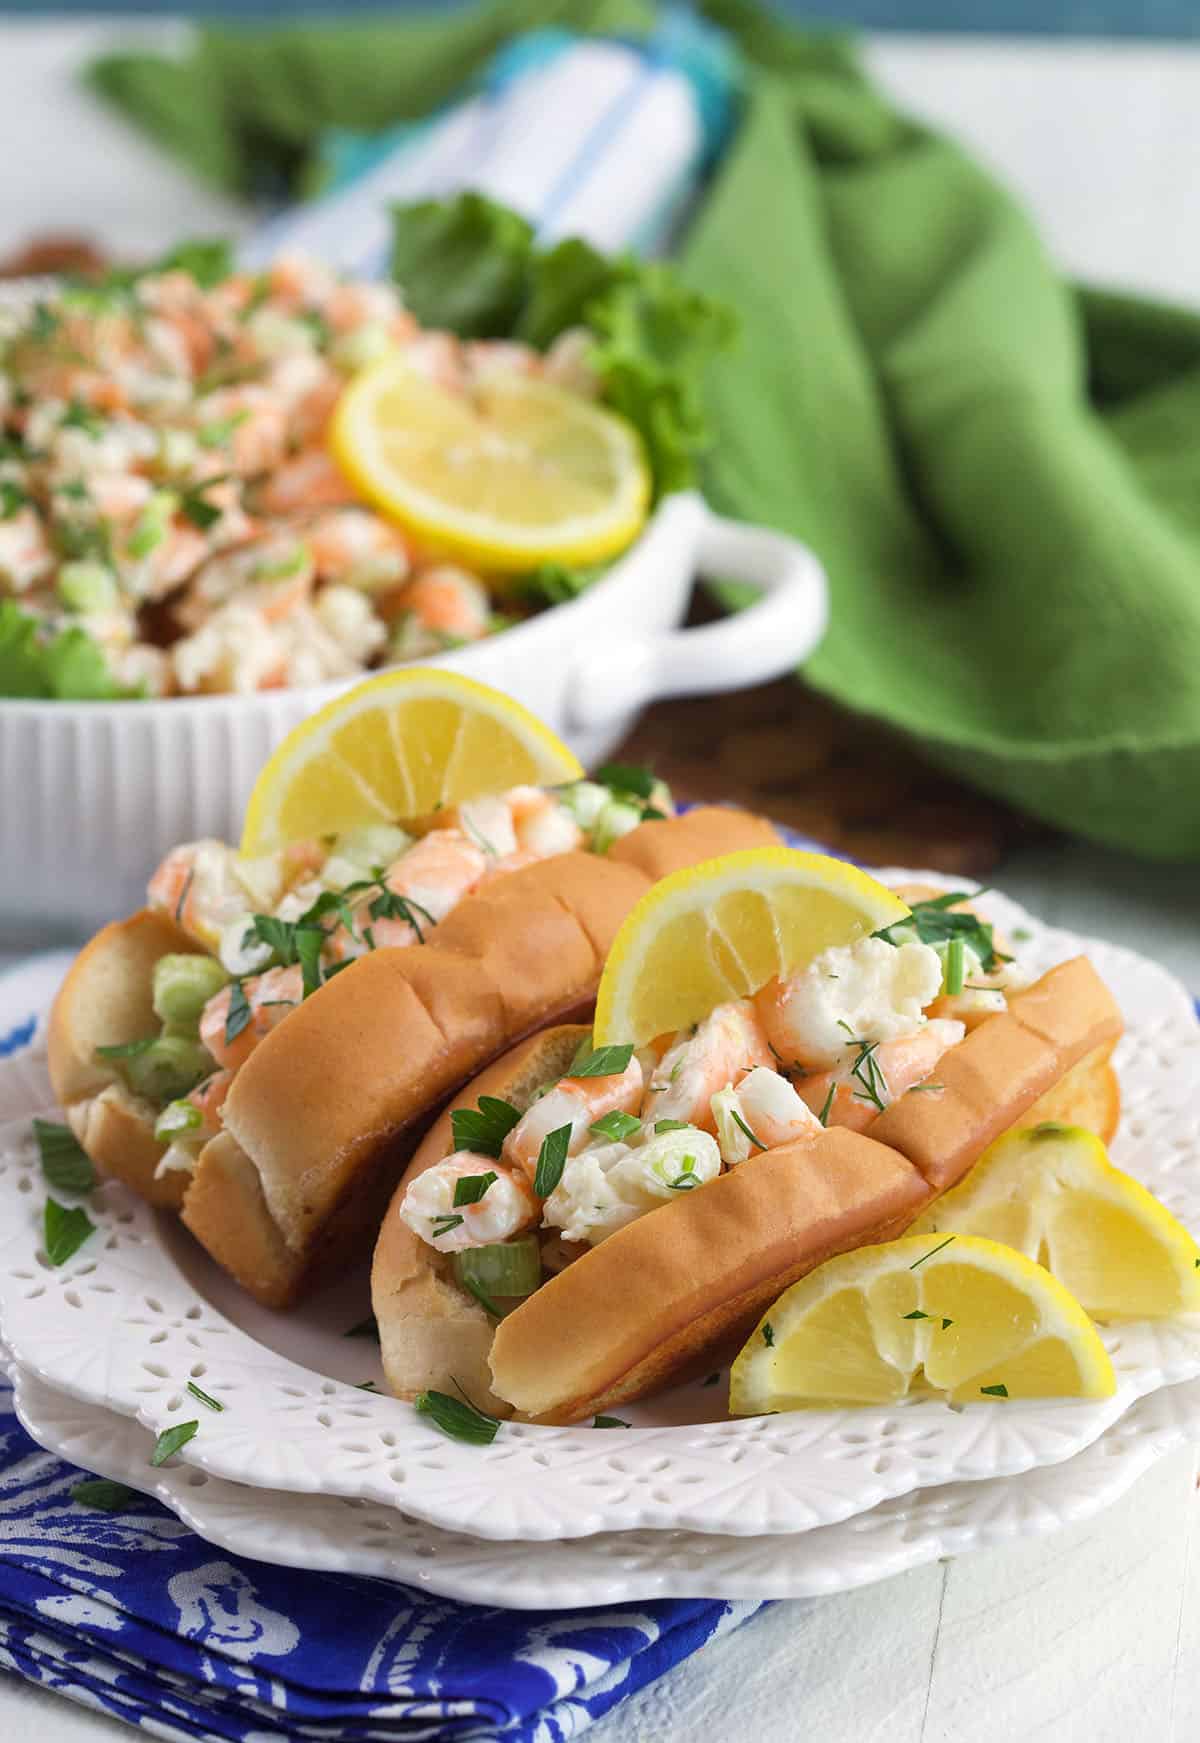 Lemon wedges are placed on the same plate with shrimp salad. 